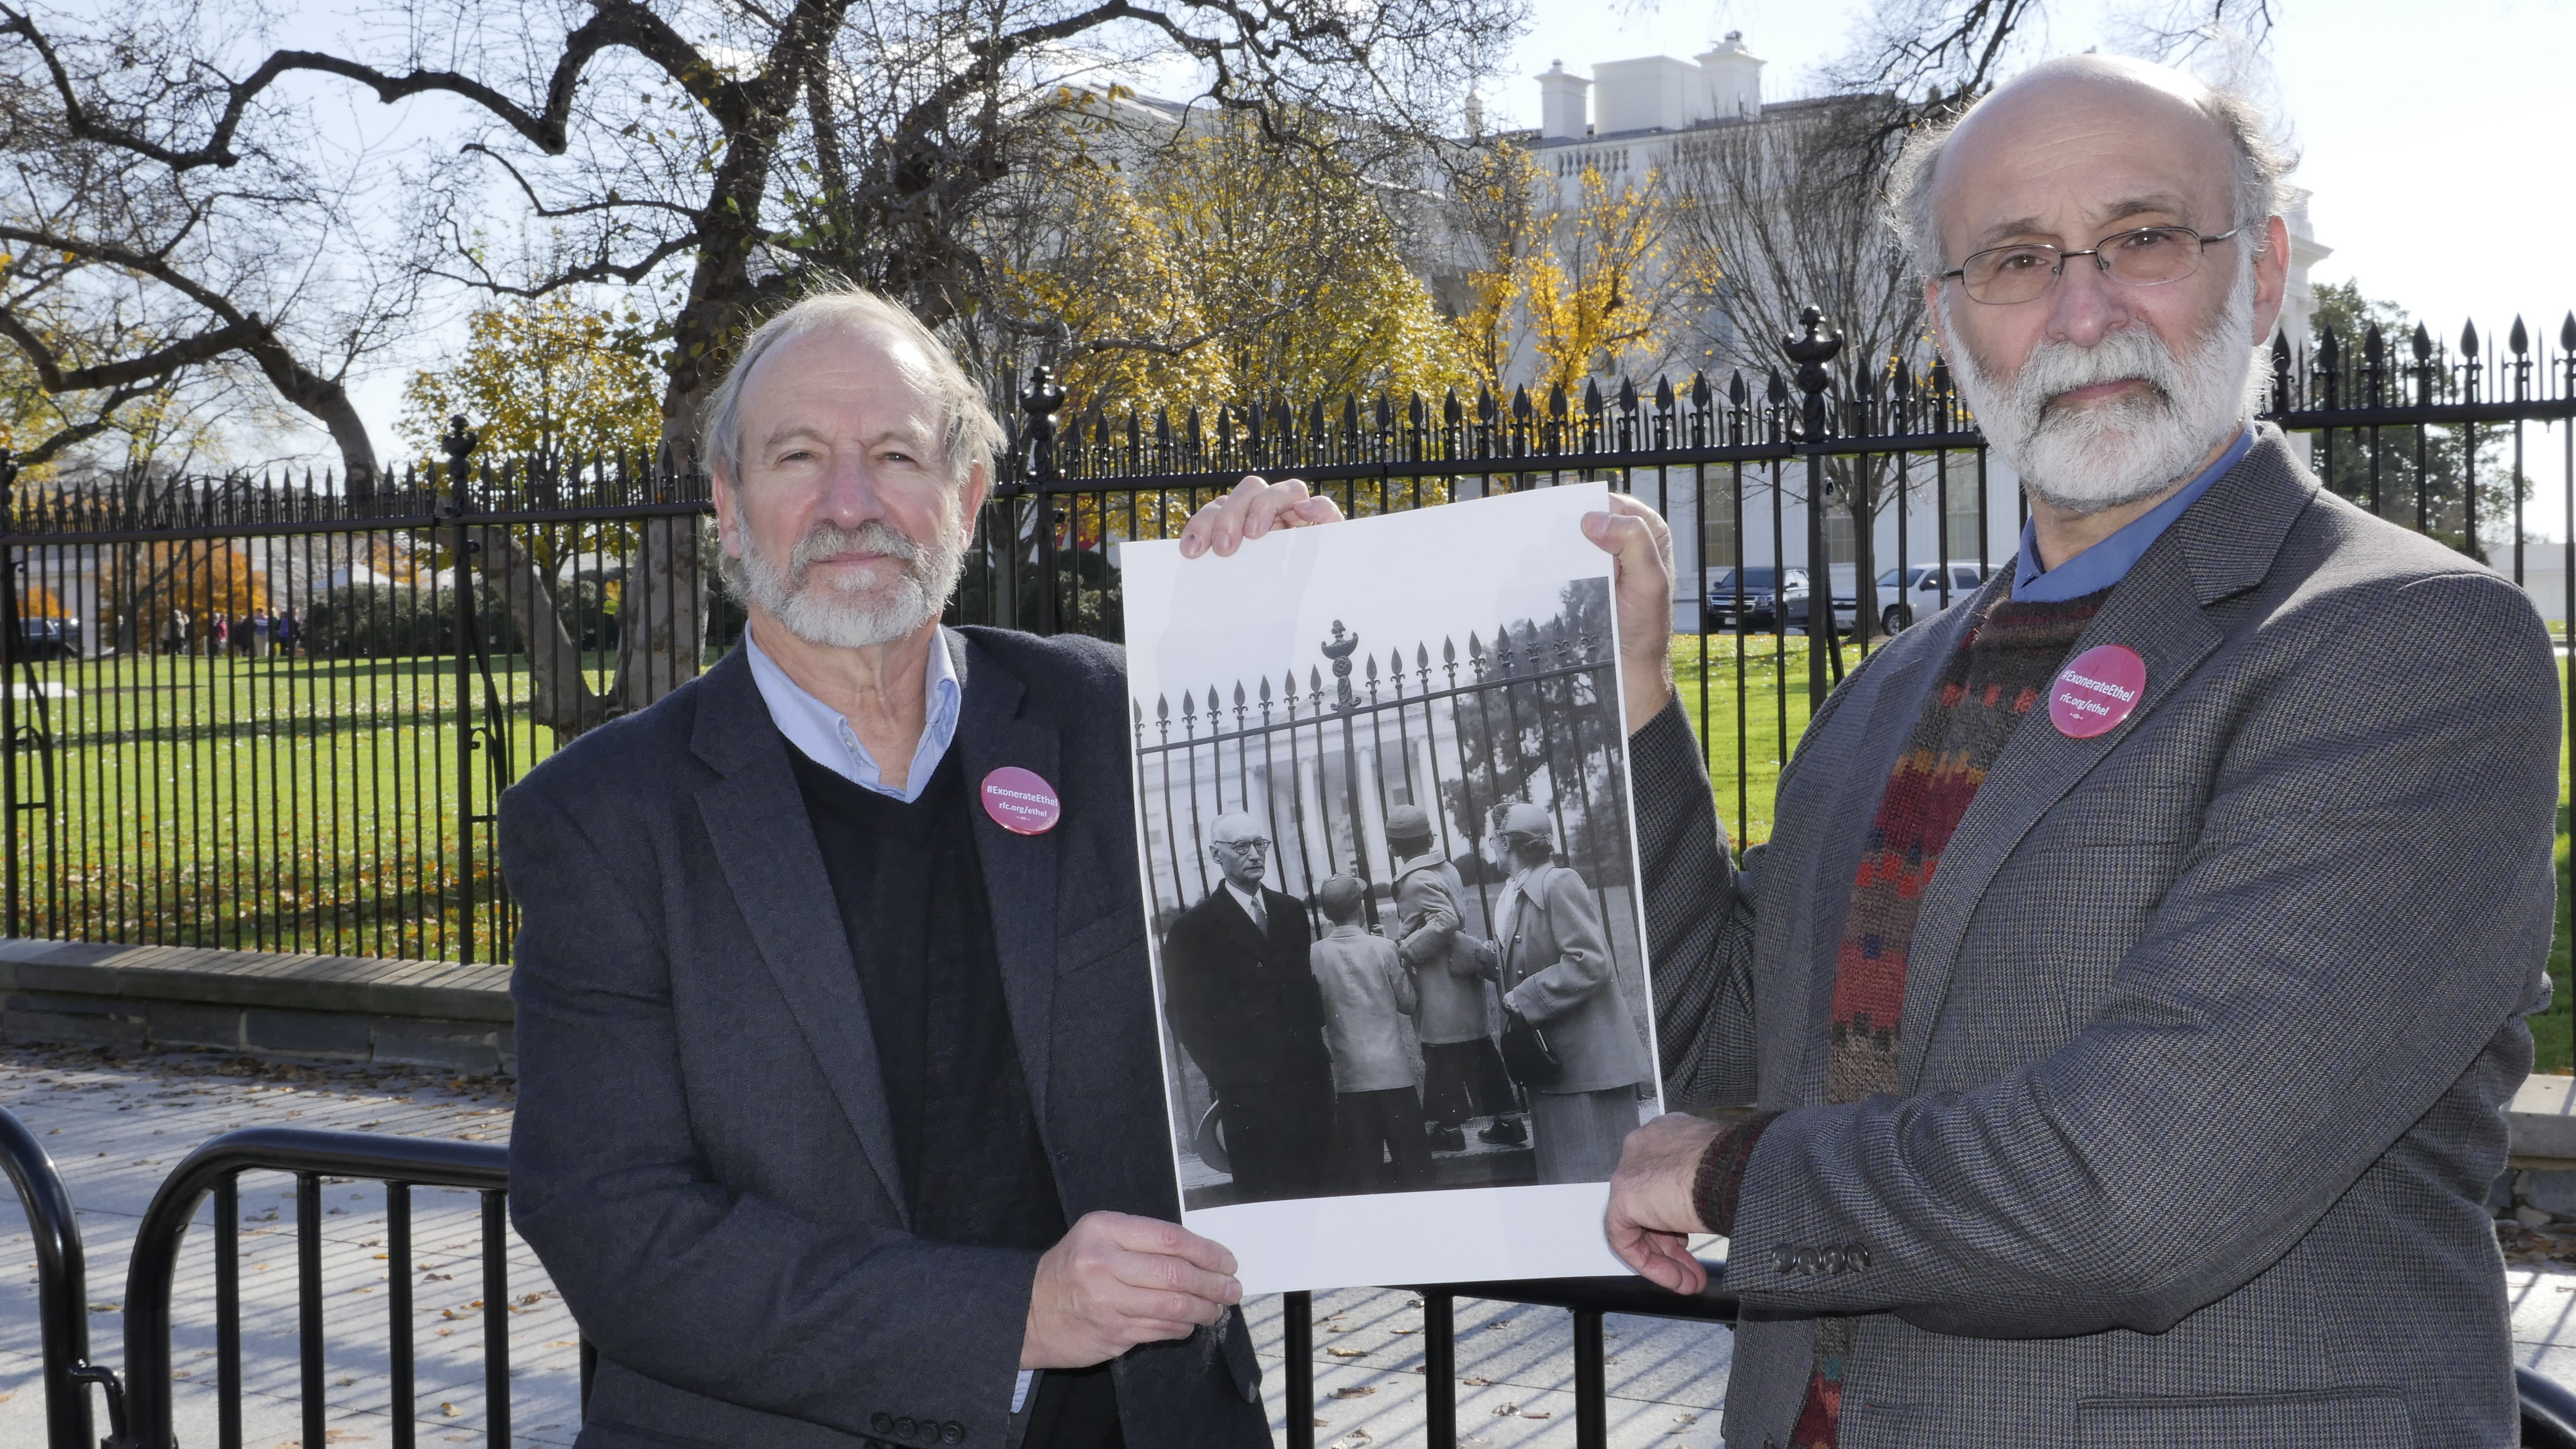 Robert and Michael holding photo of themselves from 1953